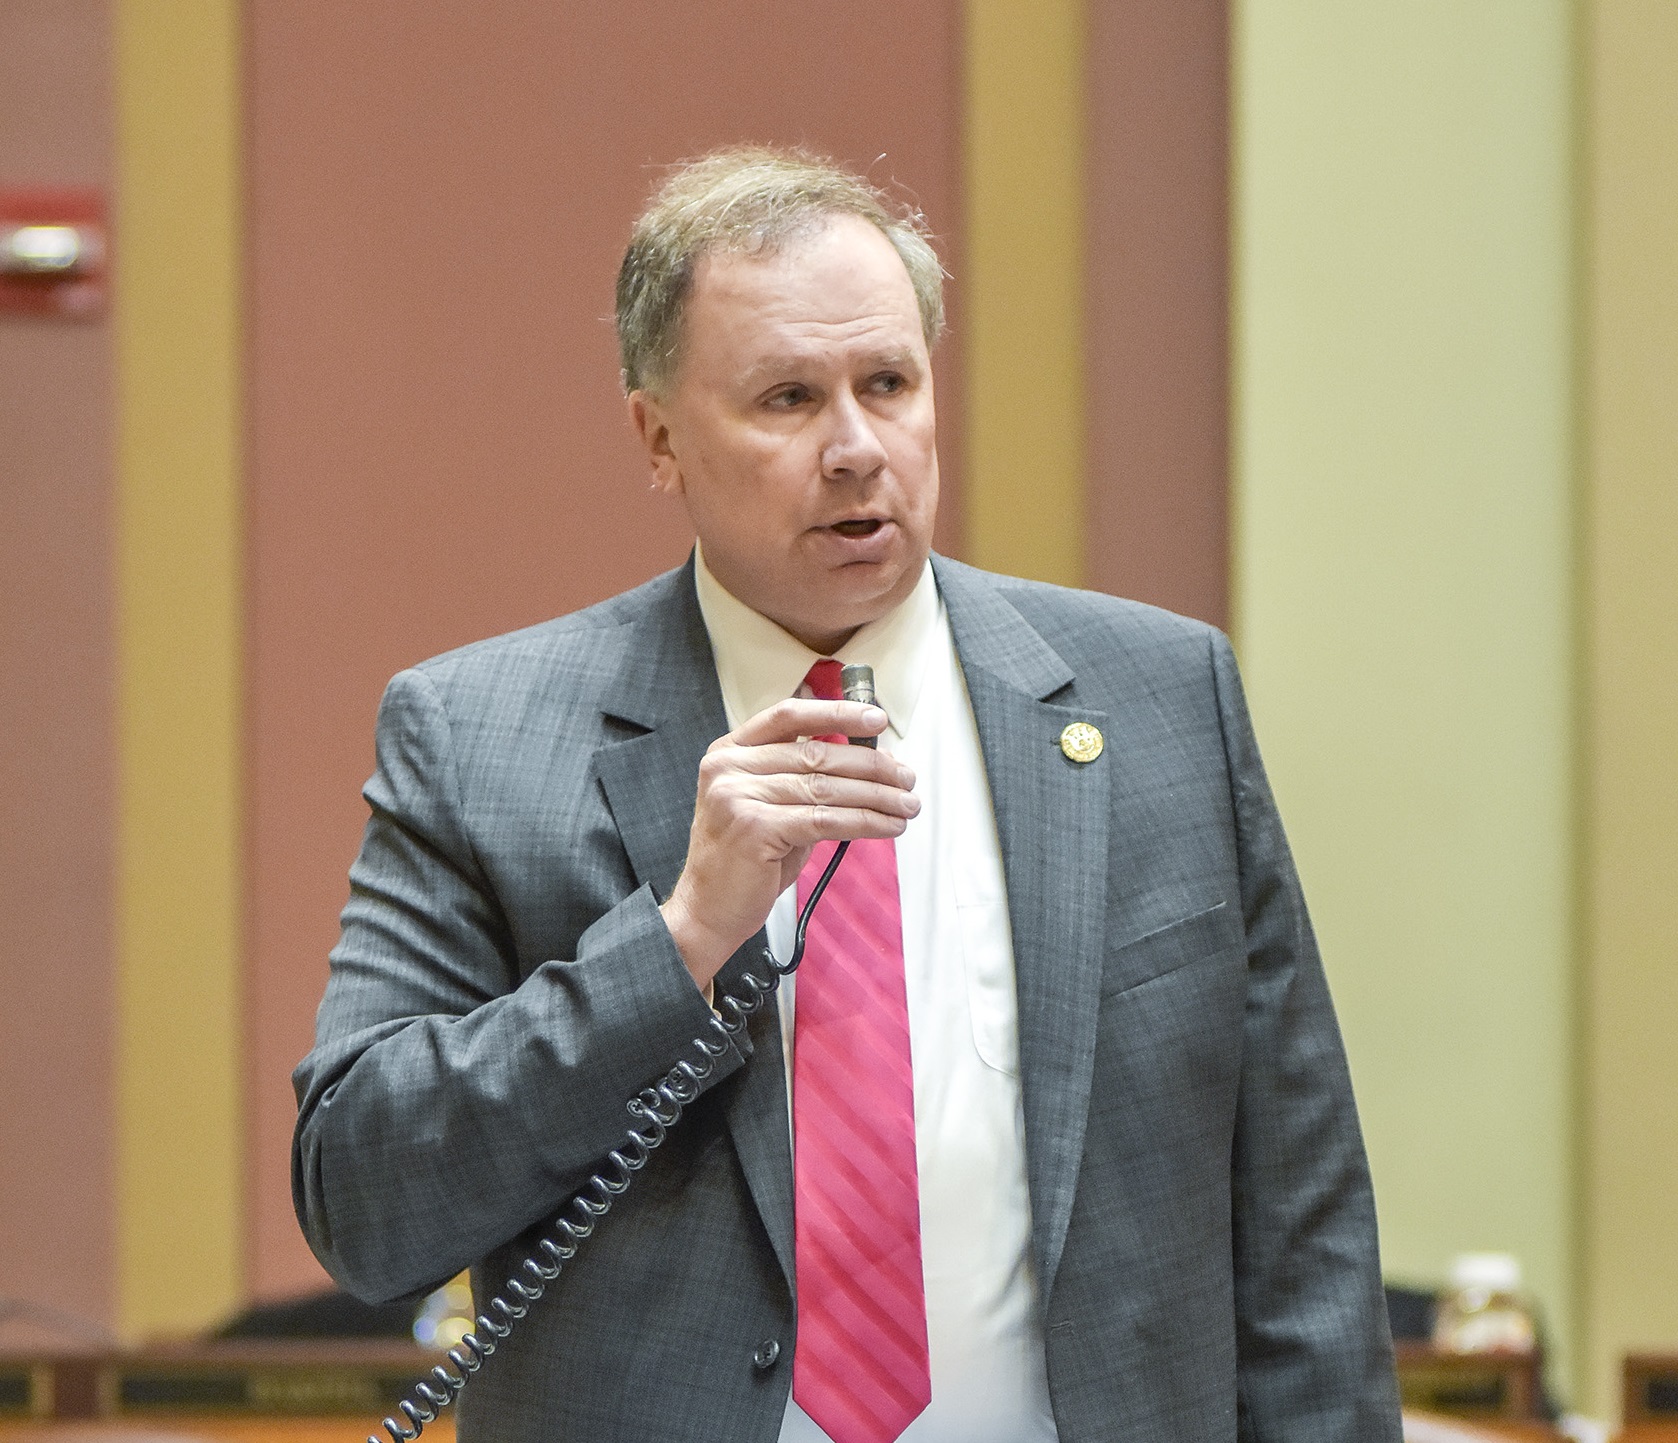 Rep. Jim Knoblach speaks on the House Floor during the 2018 session. Knoblach suspended his re-election campaign Friday. (House Photography file photo)